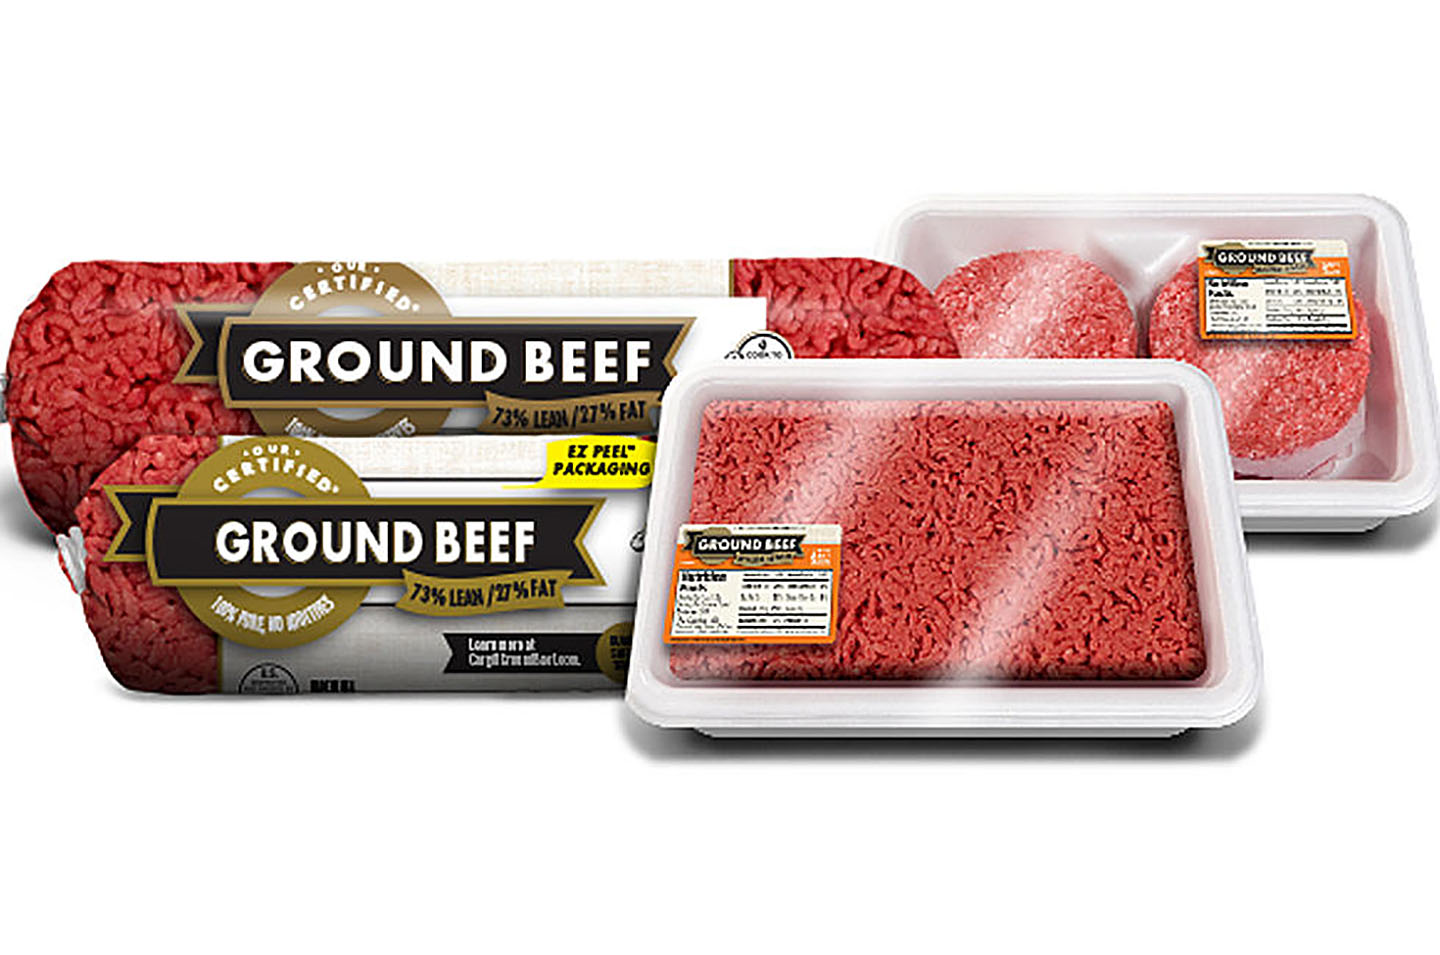 Cargill ground beef recalled — check your freezers The Daily Courier